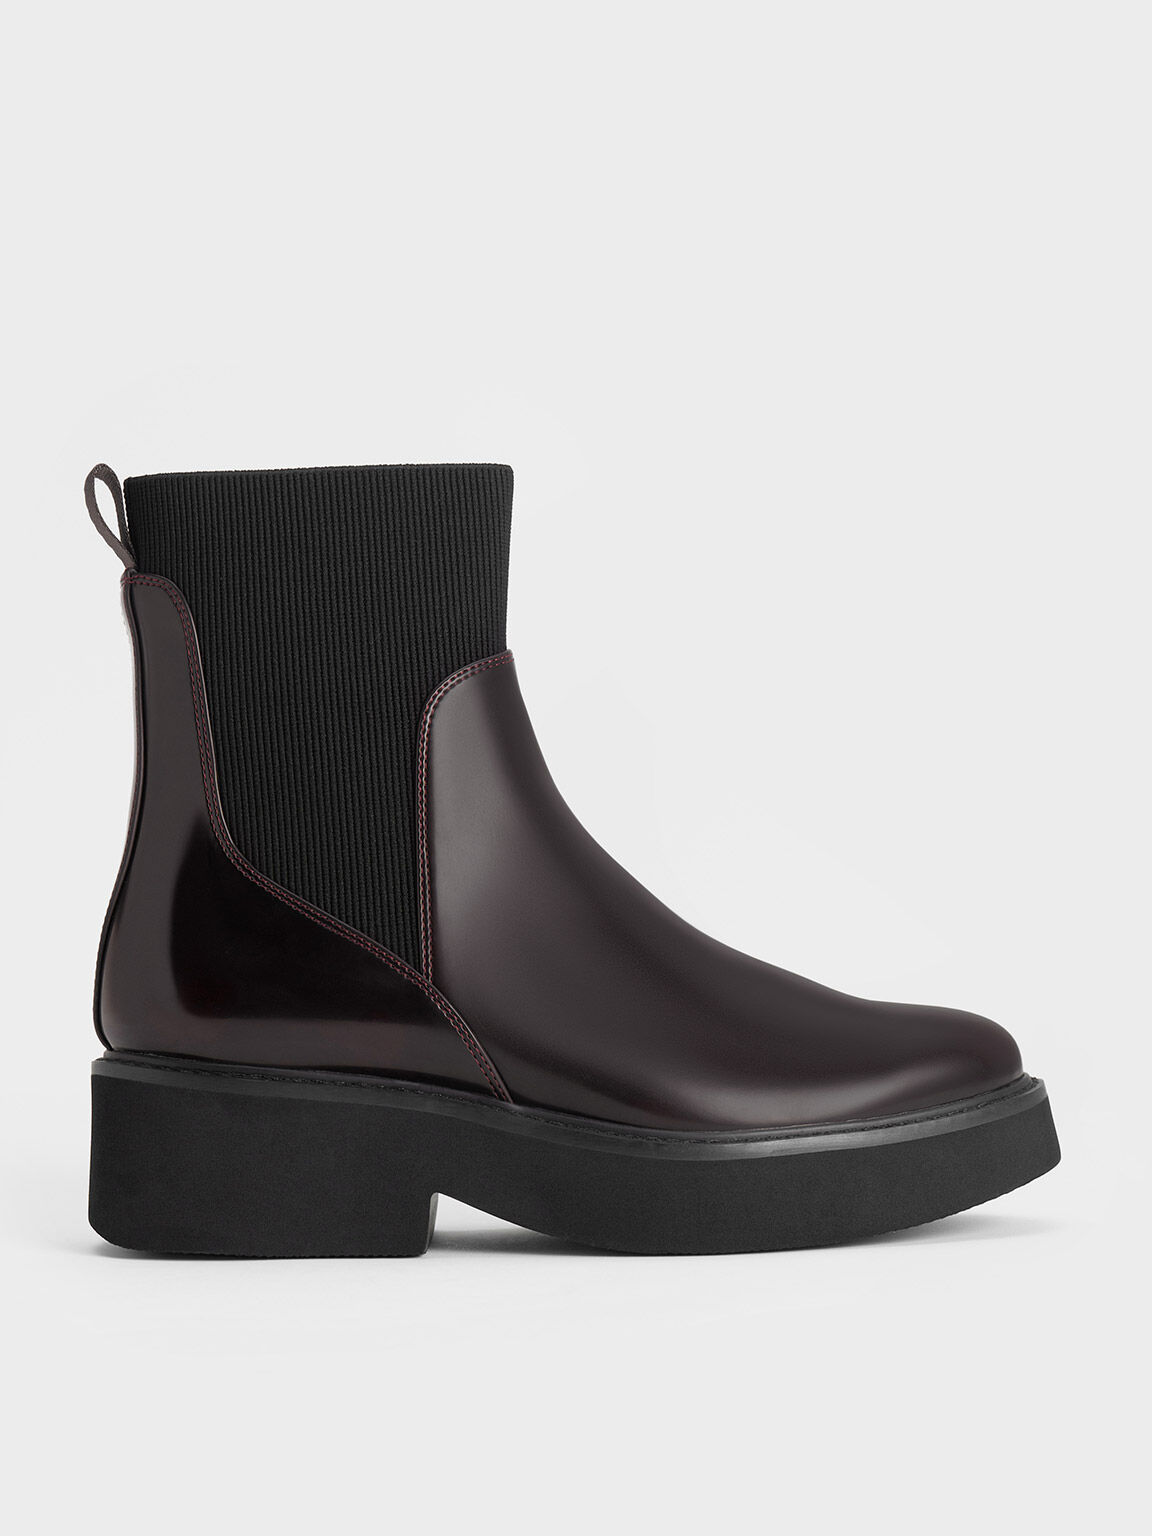 Women's Ankle Boots | Exclusive Styles | CHARLES & KEITH International